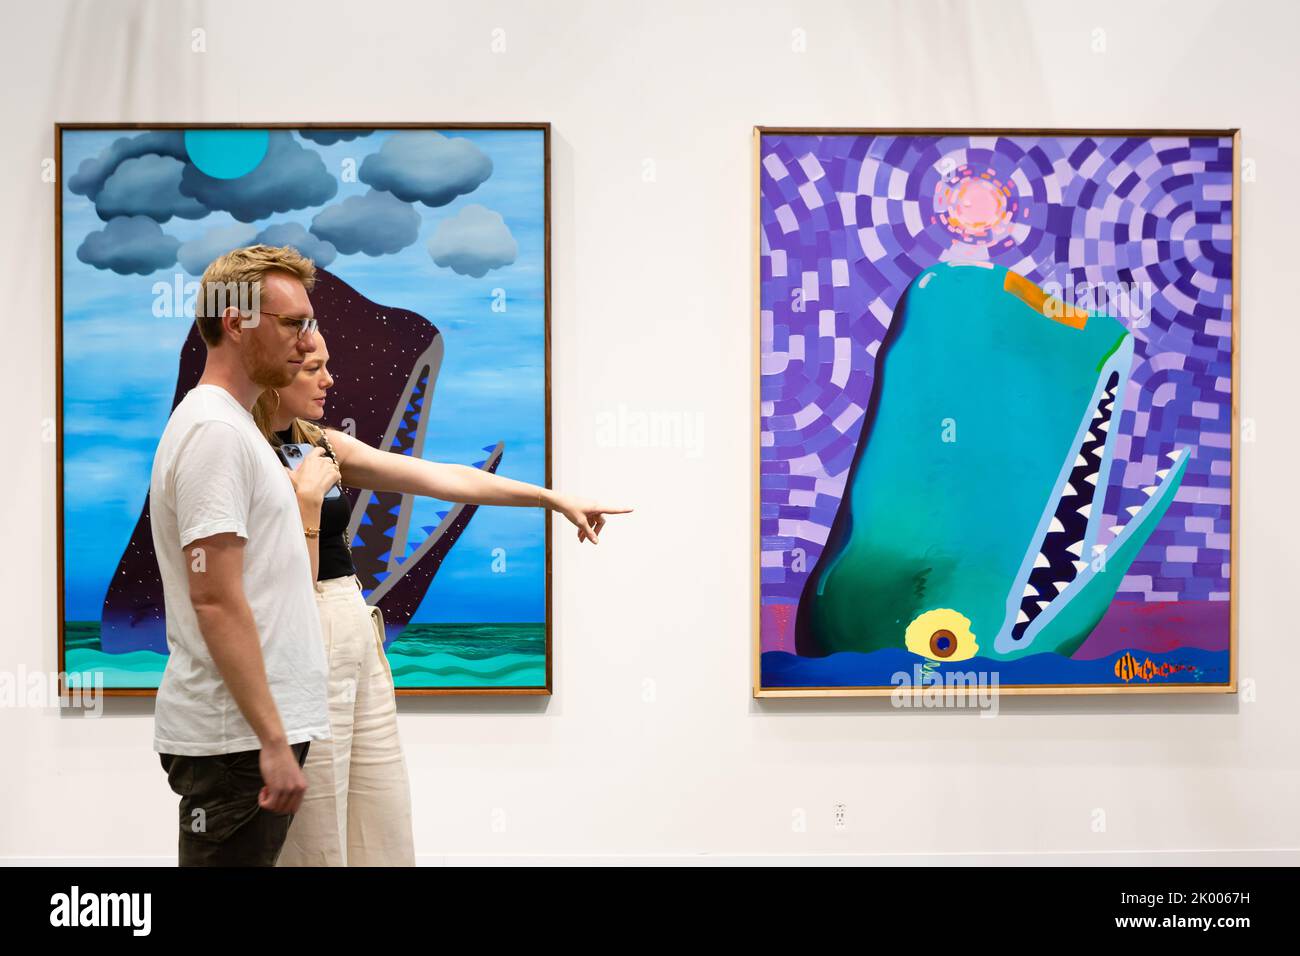 New York, NY, USA. 8th Sep, 2022. The Armory Show opened its VIP Preview at the Javits Center, with galleries worldwide showing modern and contemporary art. Visitors look at whimsical whales by painter Craig Kucia in The Pit gallery booth. Credit: Ed Lefkowicz/Alamy Live News Stock Photo